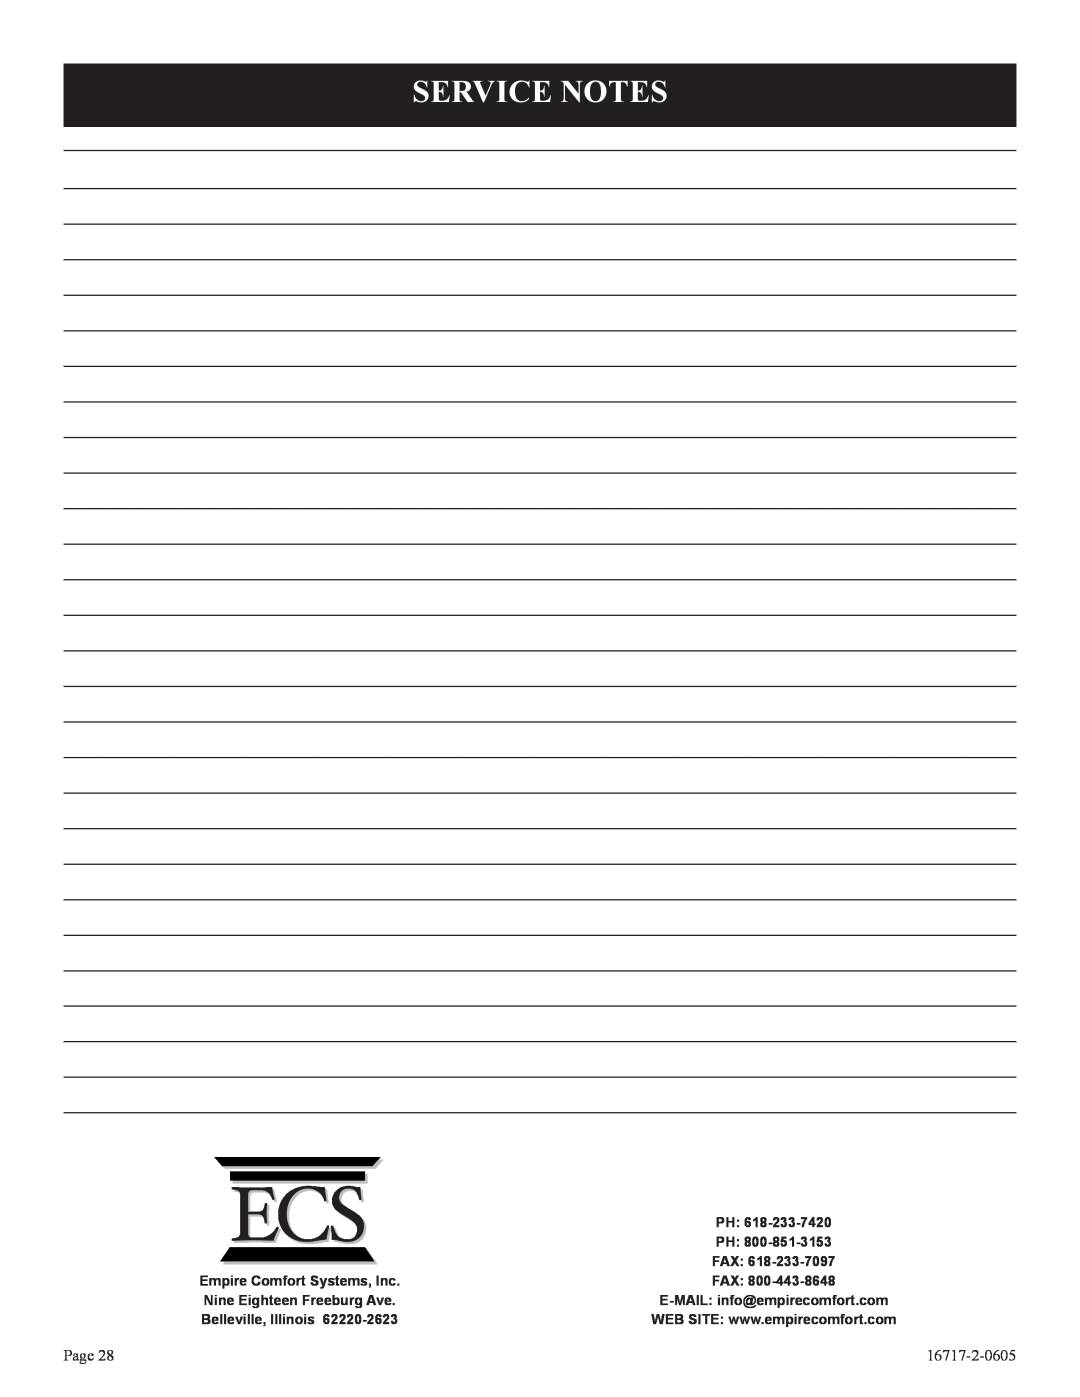 Empire Comfort Systems VFHS-20R-4, VFHS-20/10T-4 Service Notes, Page, 16717-2-0605, Fax, Empire Comfort Systems, Inc 